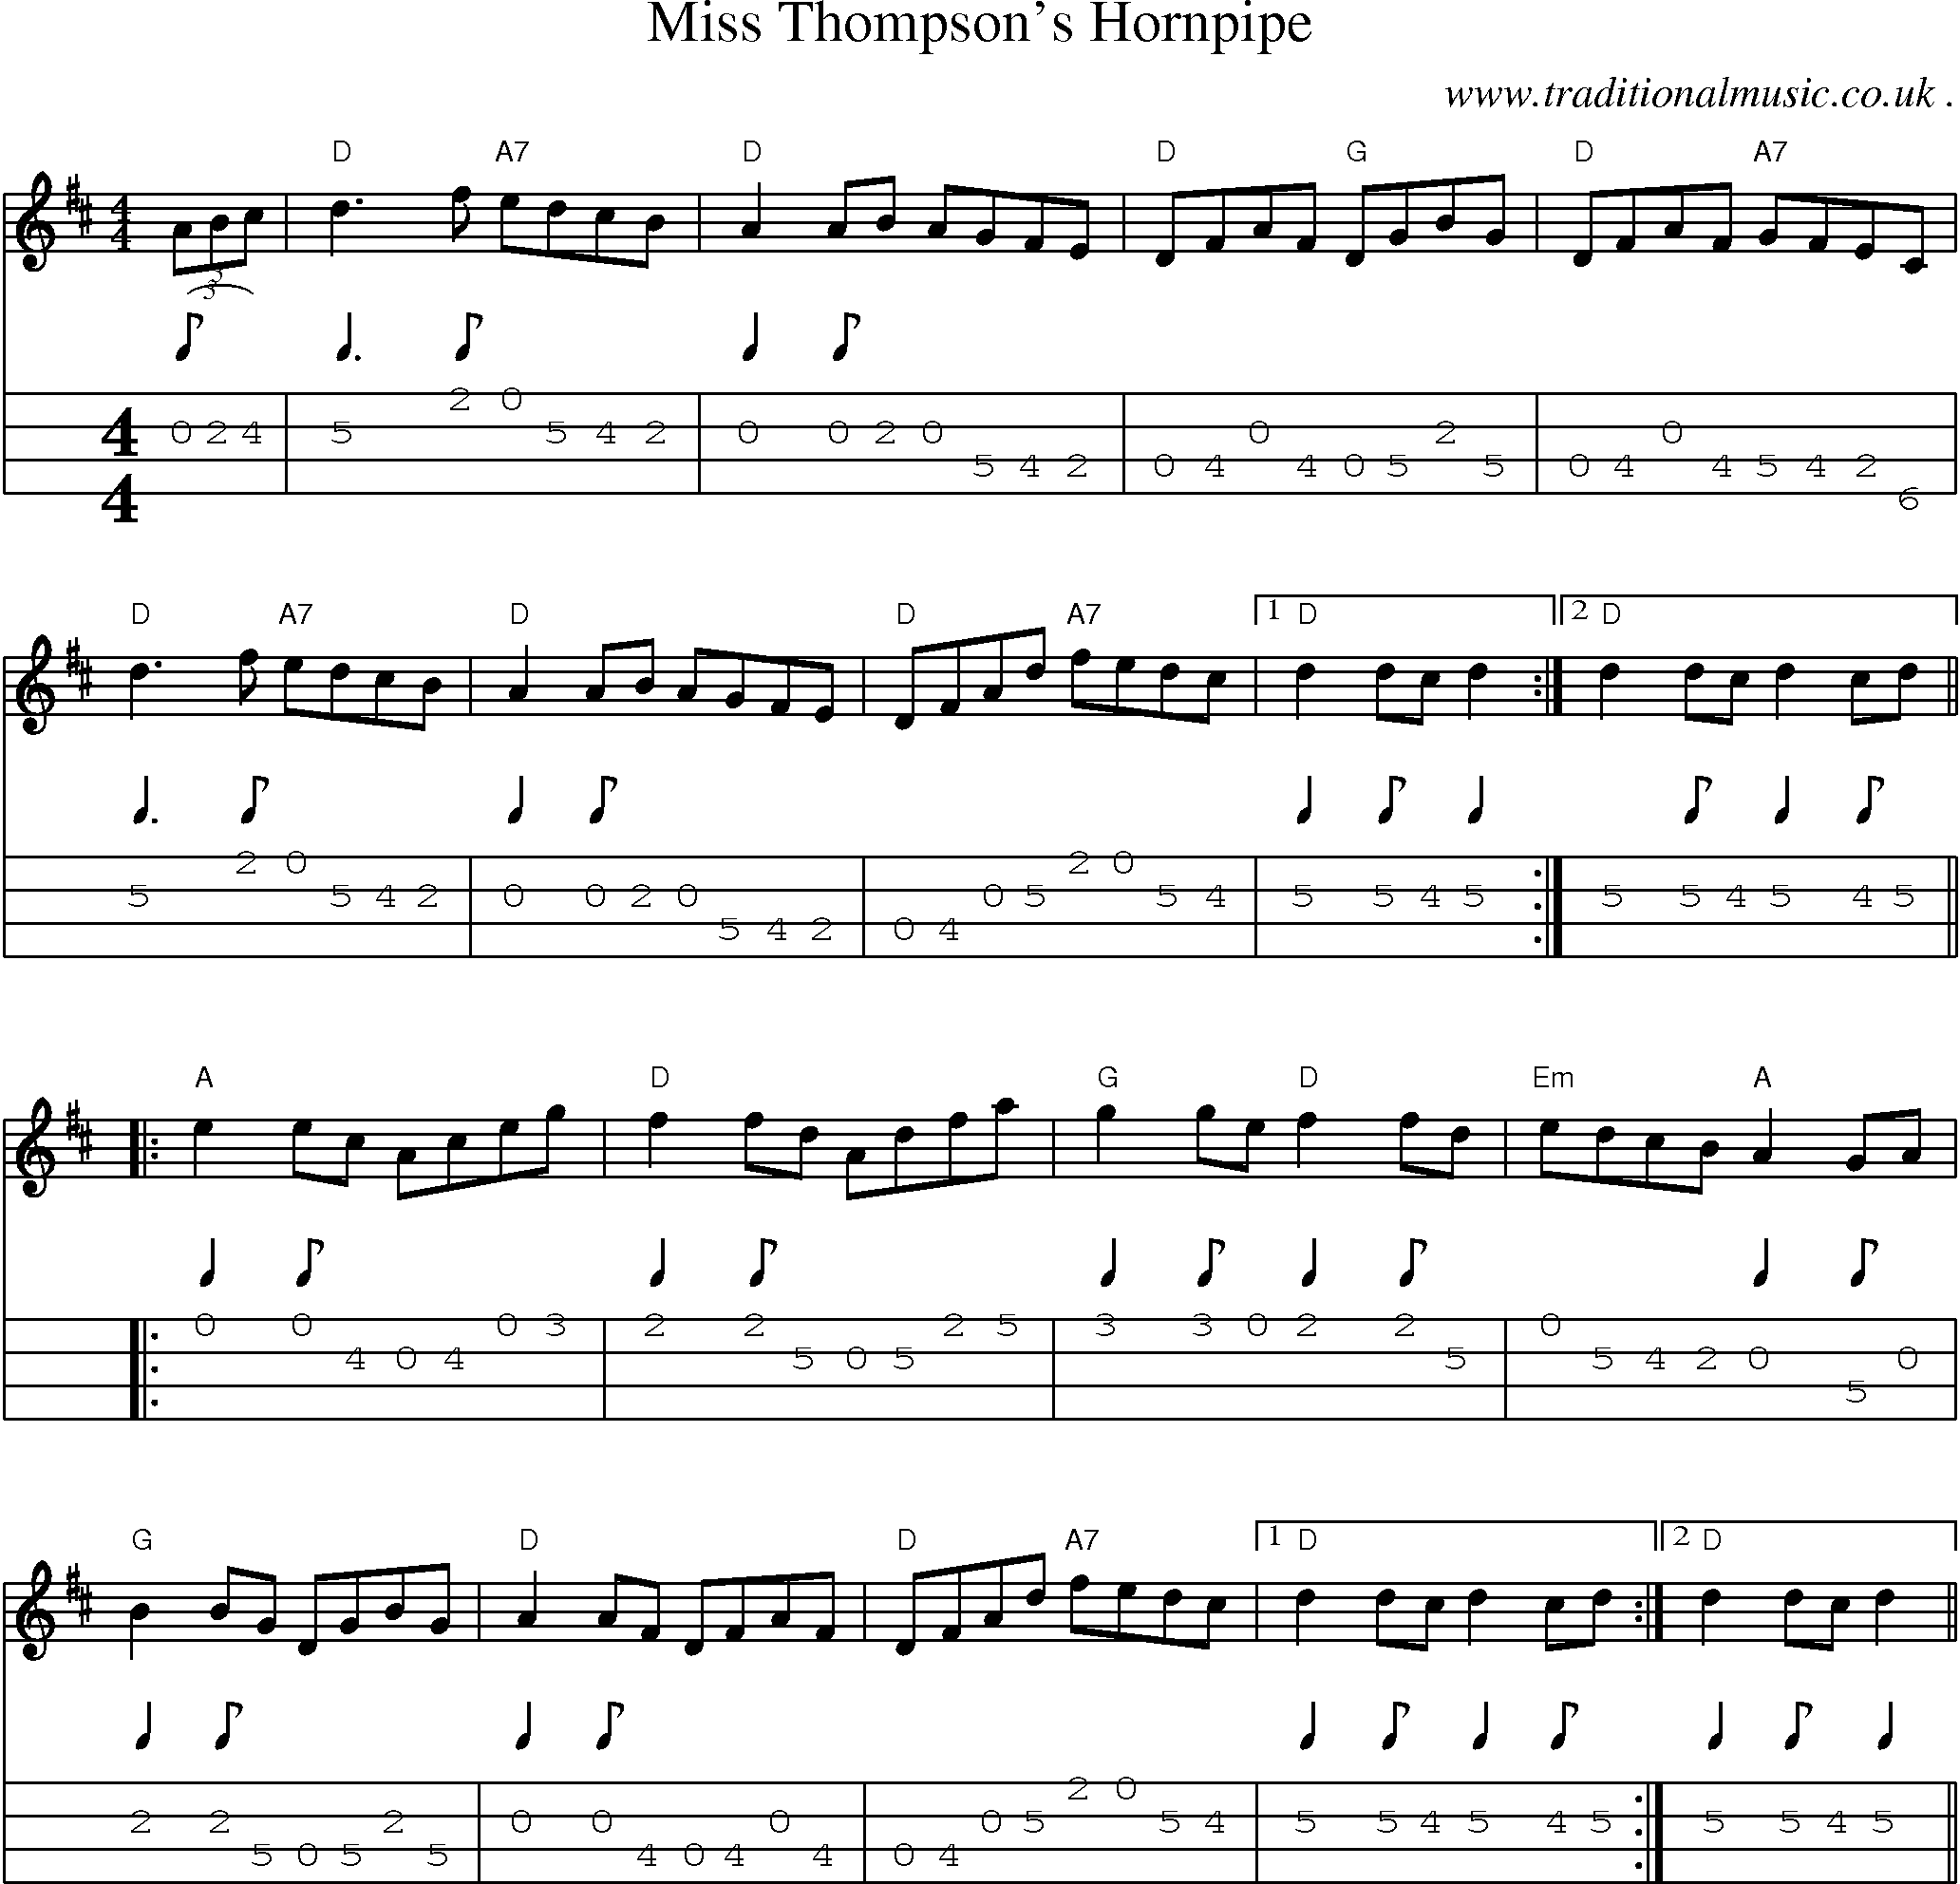 Music Score and Guitar Tabs for Miss Thompsons Hornpipe